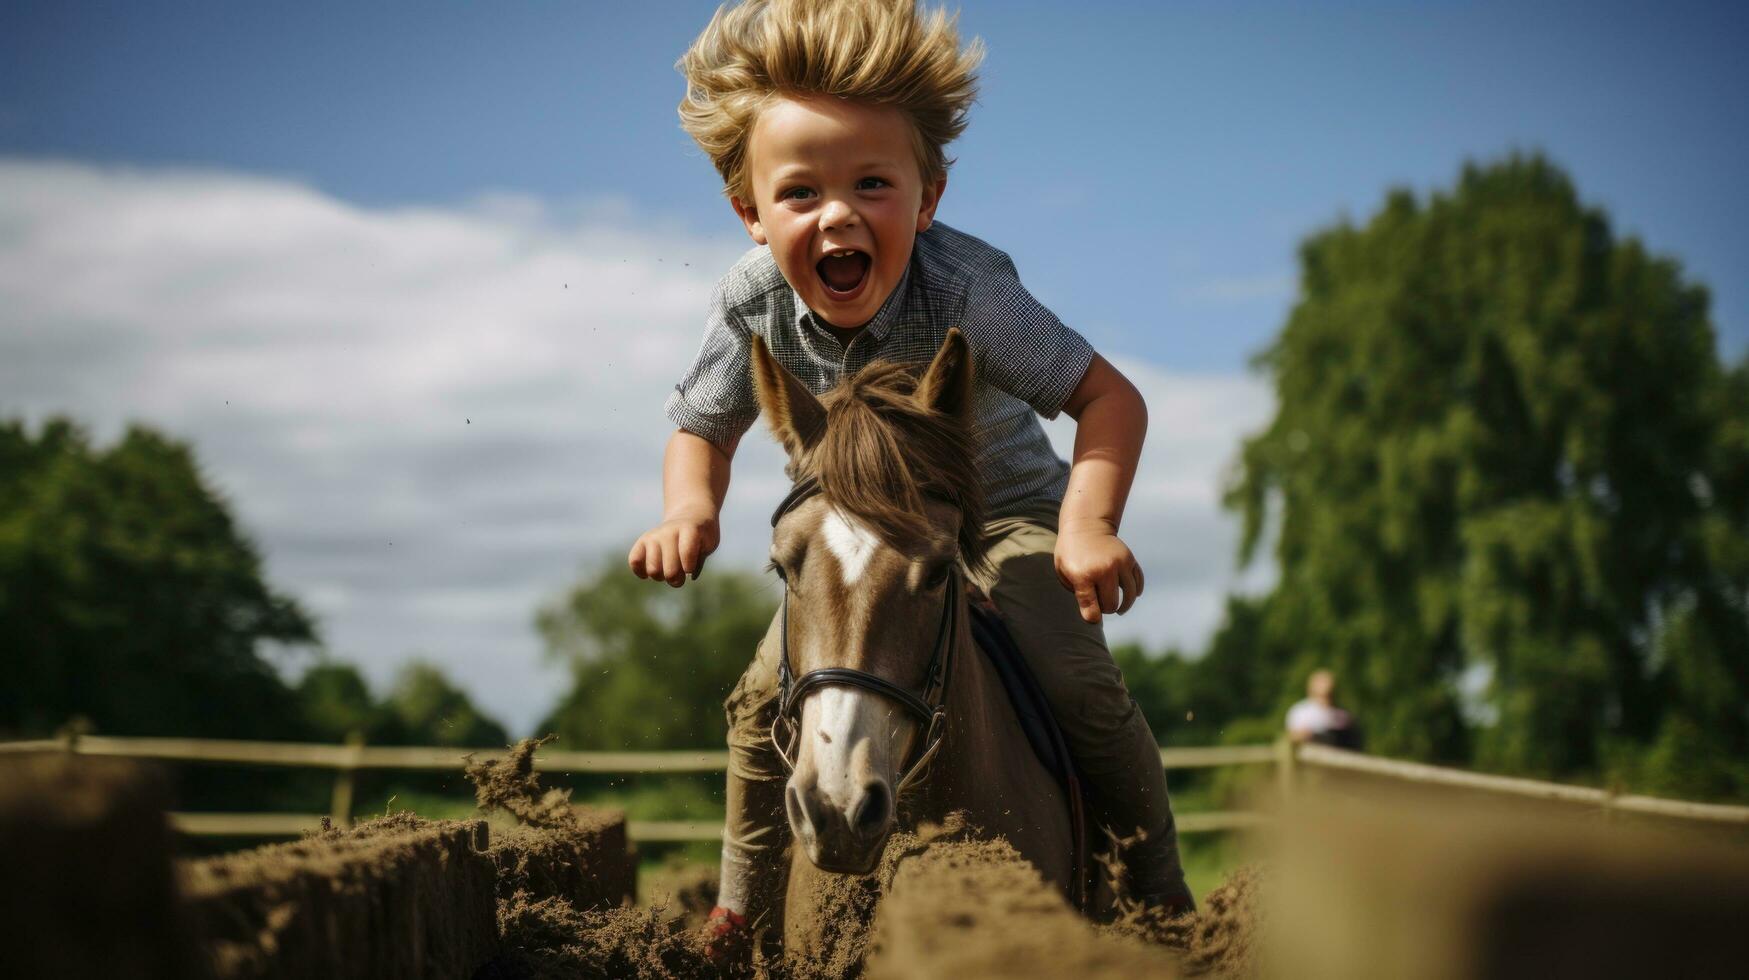 A boy jumping over a hurdle with his hobbyhorse photo